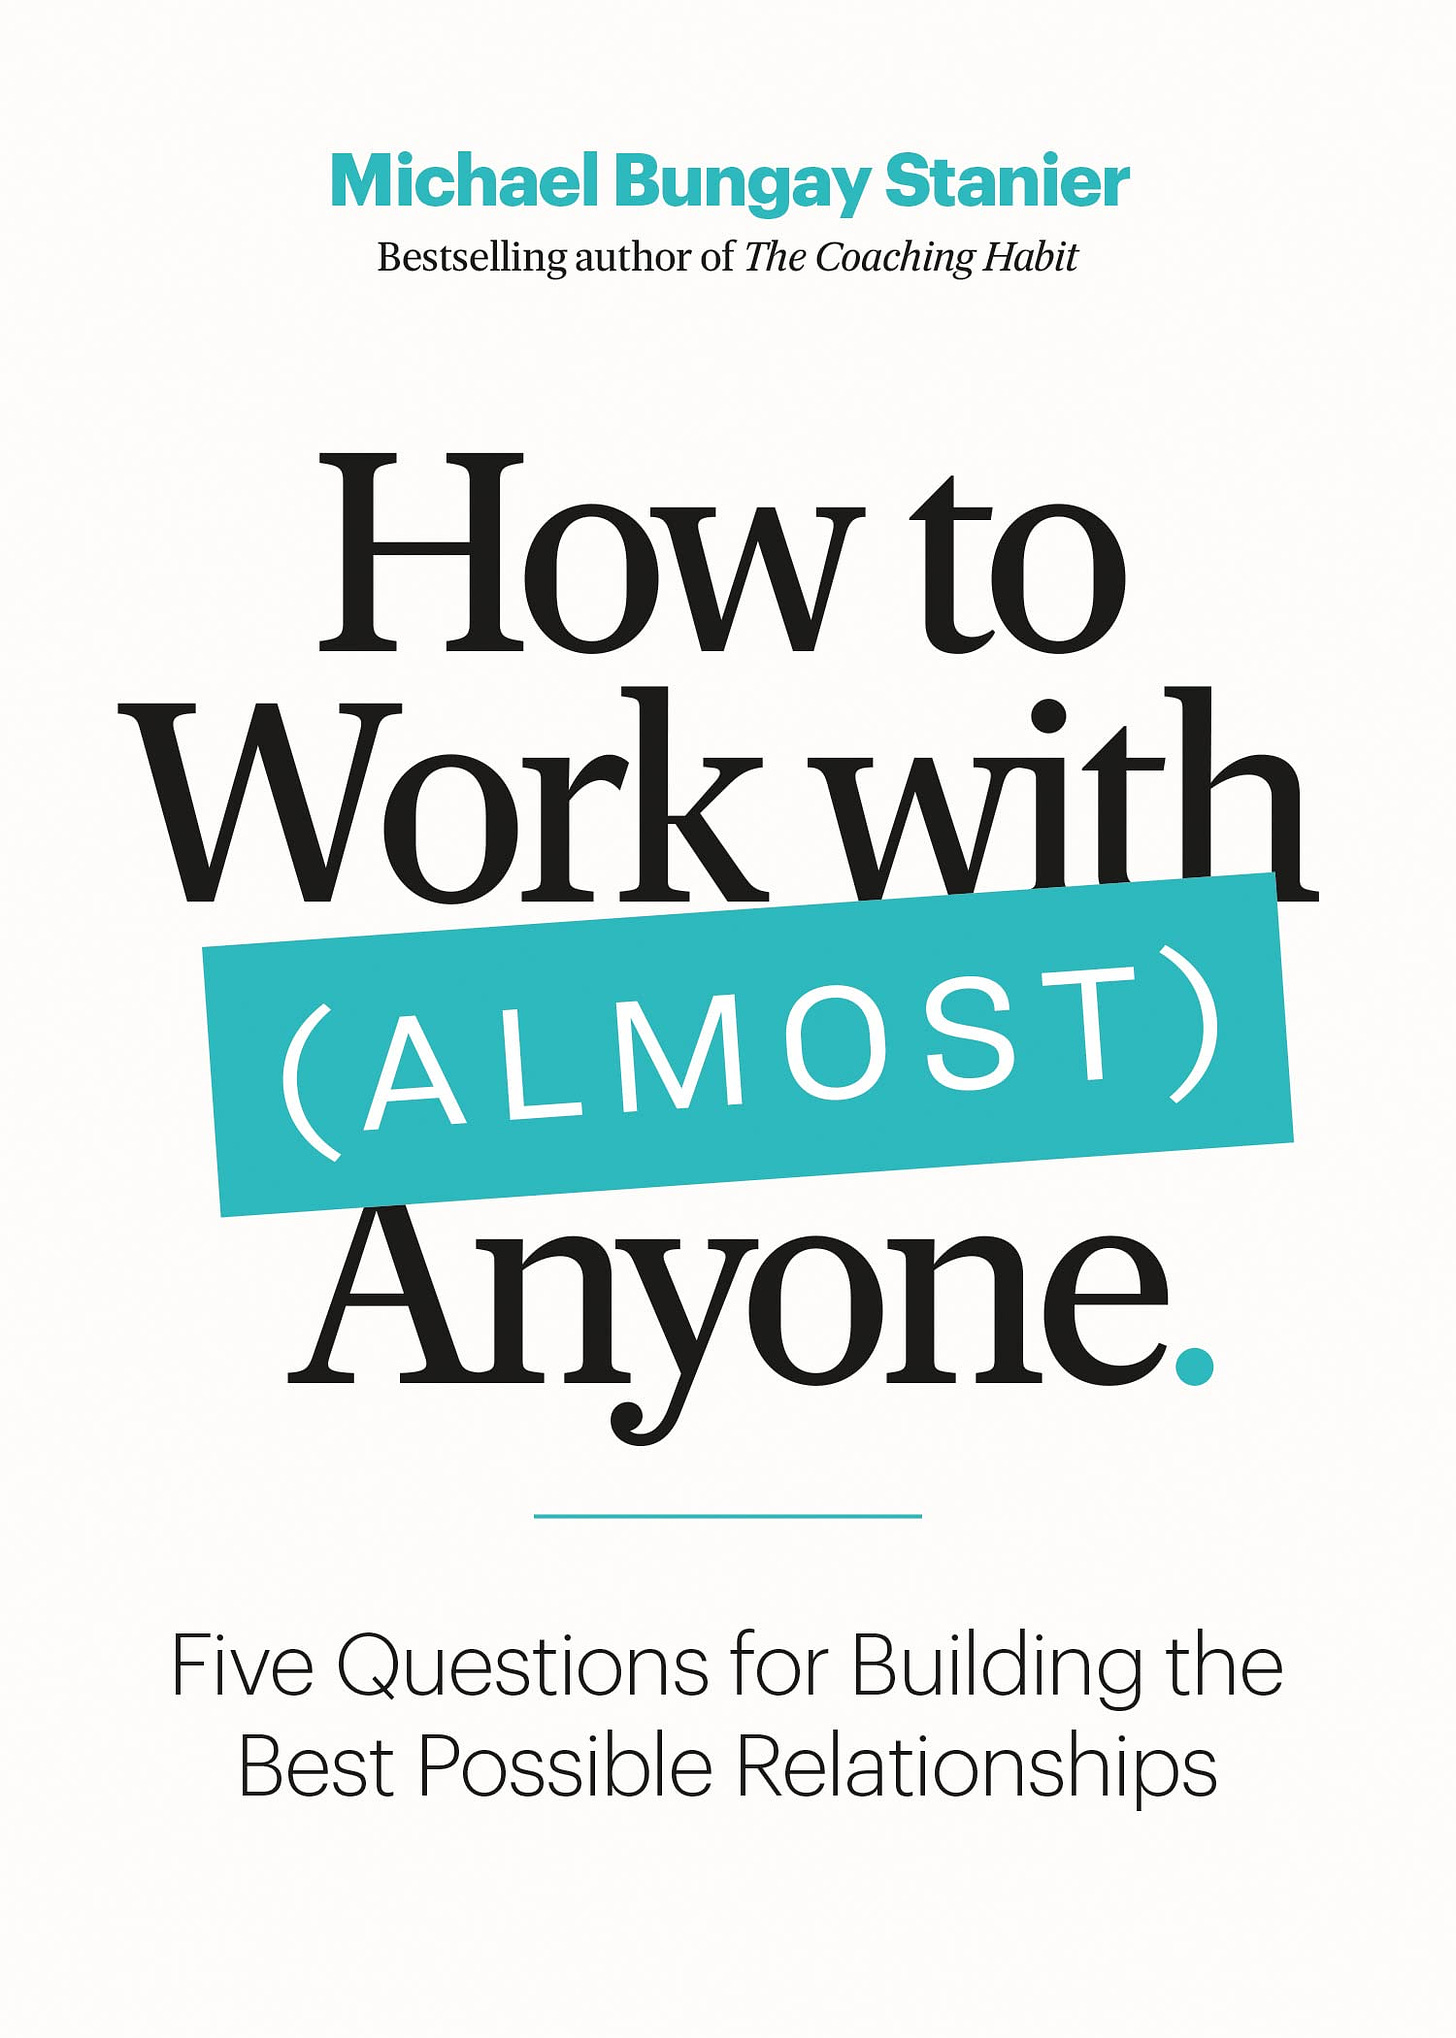 How to Work with (Almost) Anyone: Five Questions for Building the Best  Possible Relationships by Michael Bungay Stanier | Goodreads